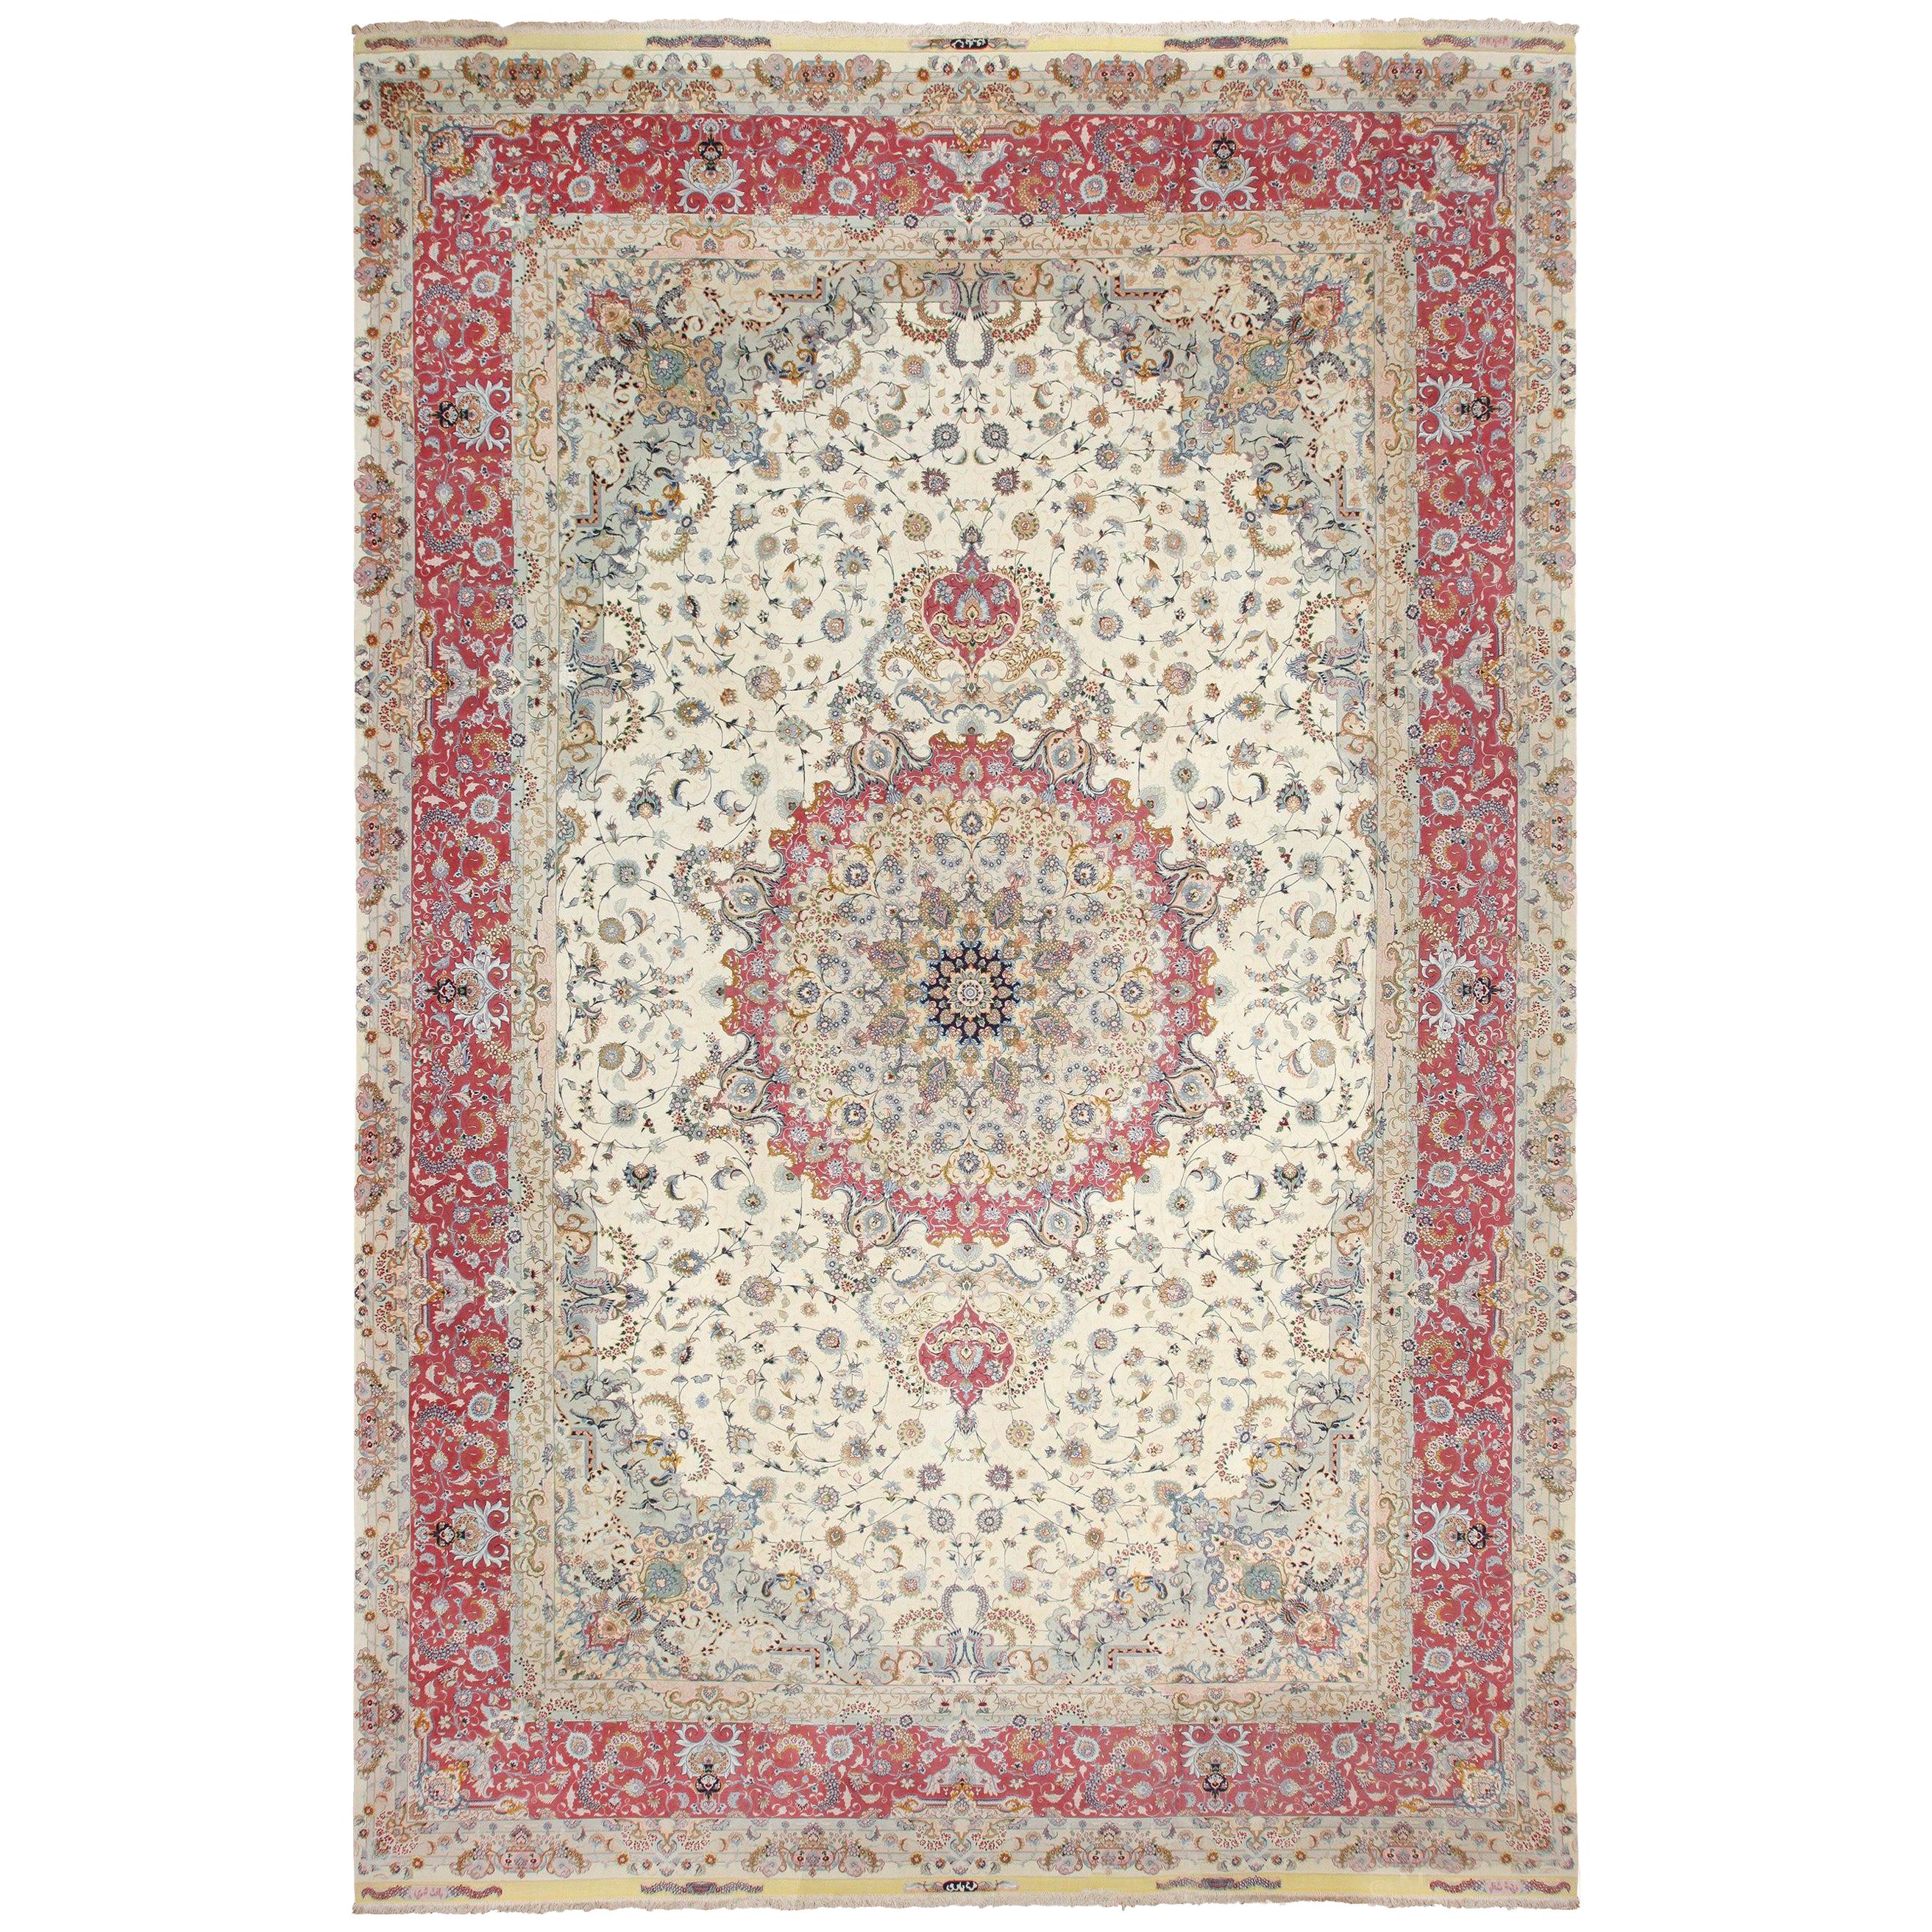 Oversize Silk and Wool Vintage Persian Tabriz Rug. Size: 13 ft x 20 ft